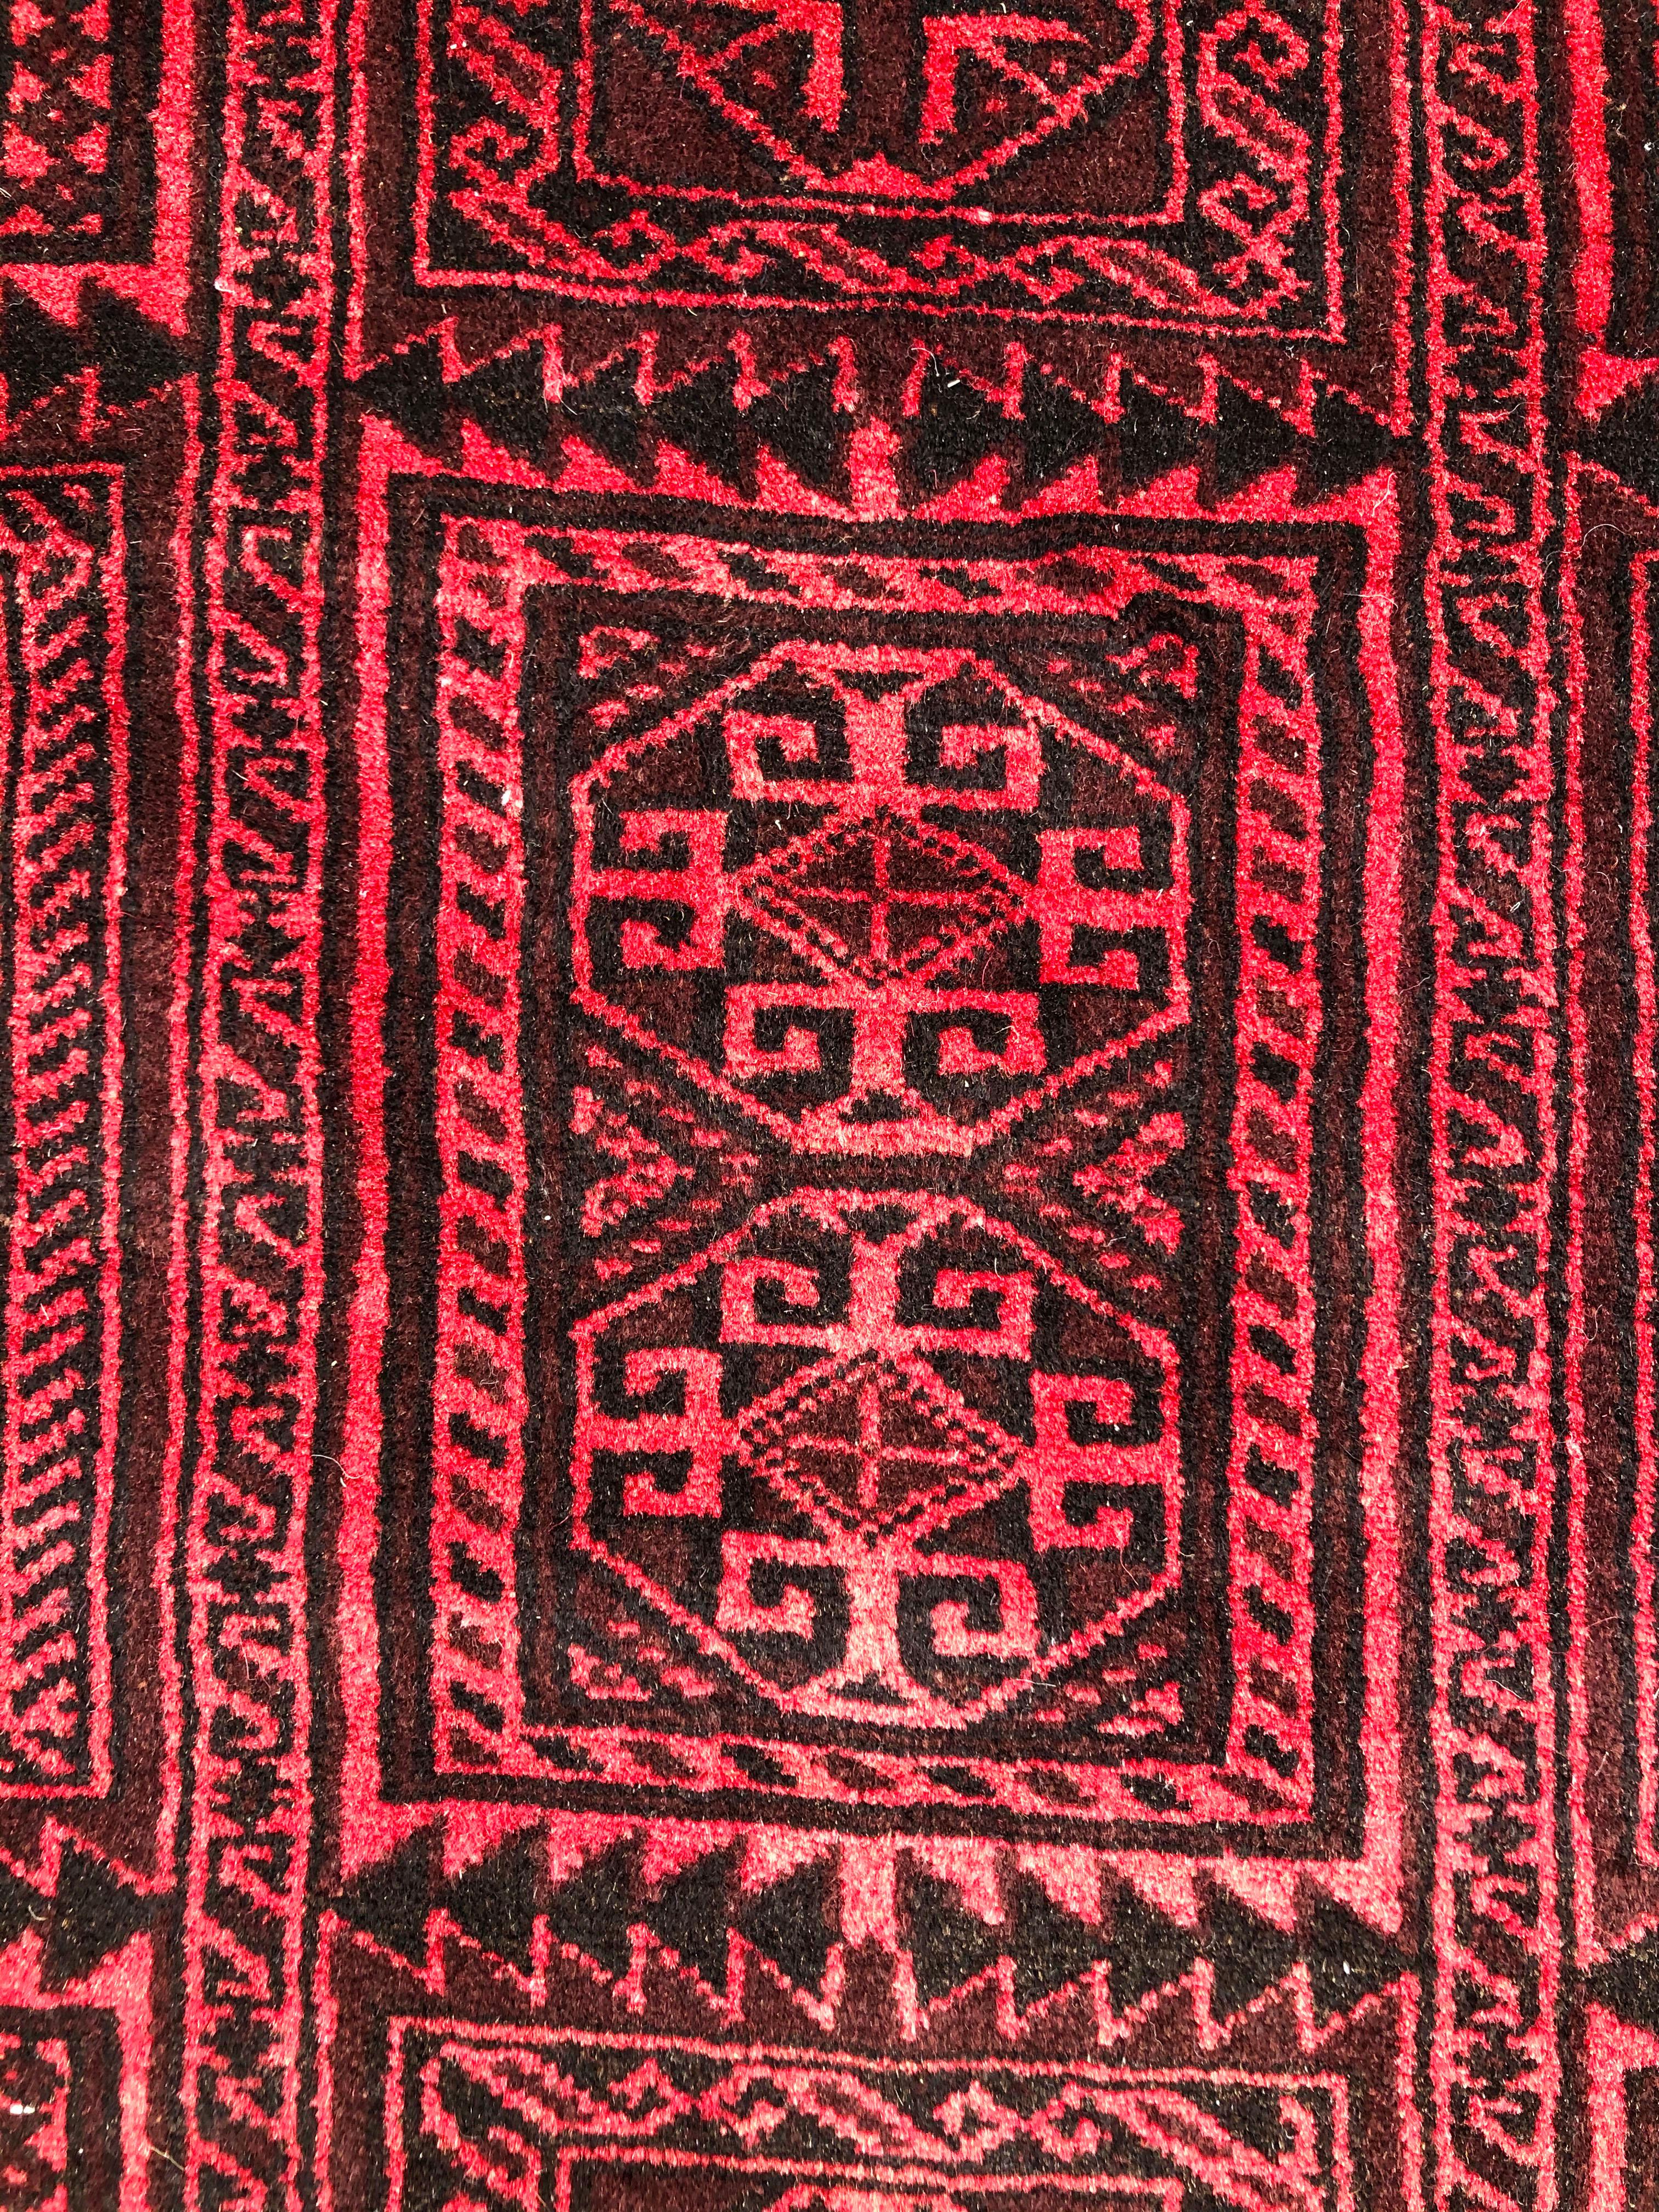 This authentic Persian Baluchi rug has wool pile and foundation which are hand knotted by the nomads of Baluchi. The age of this rug is almost 50 years old. The base and border color is red. The size of this rug is 4 feet 3 inches wide by 7 feet